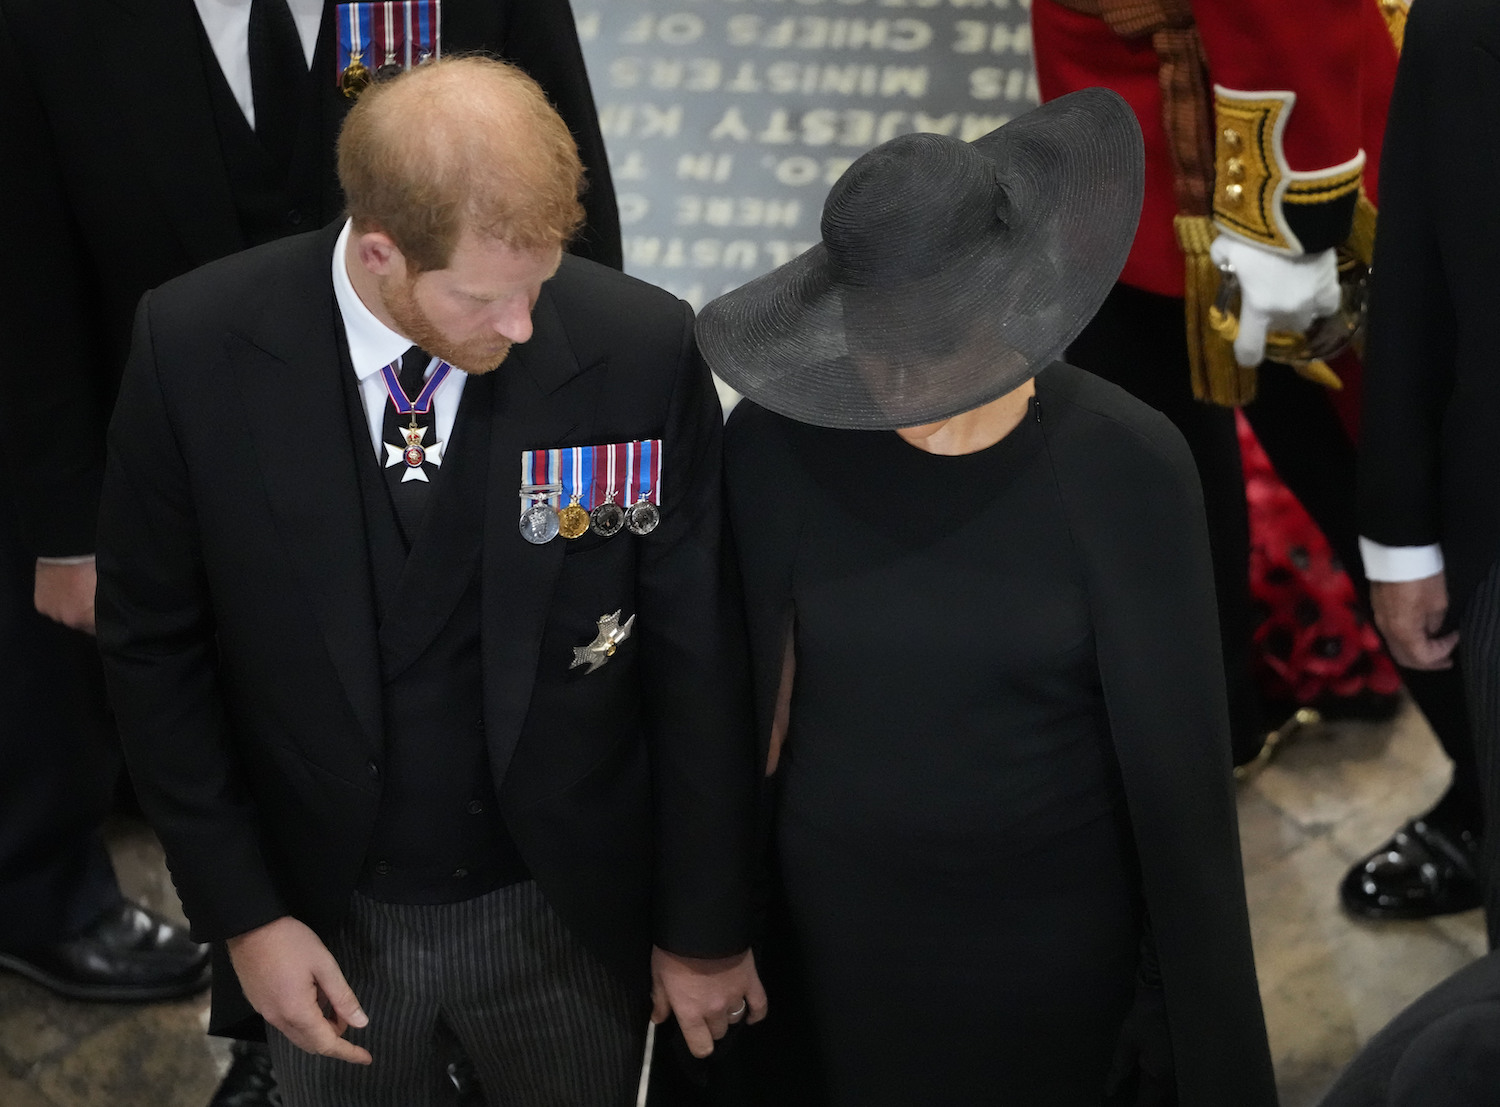 Prince Harry and Meghan Markle’s Non-Verbal Behaviors at Queen’s Funeral Were Revealing, Body Language Expert Says